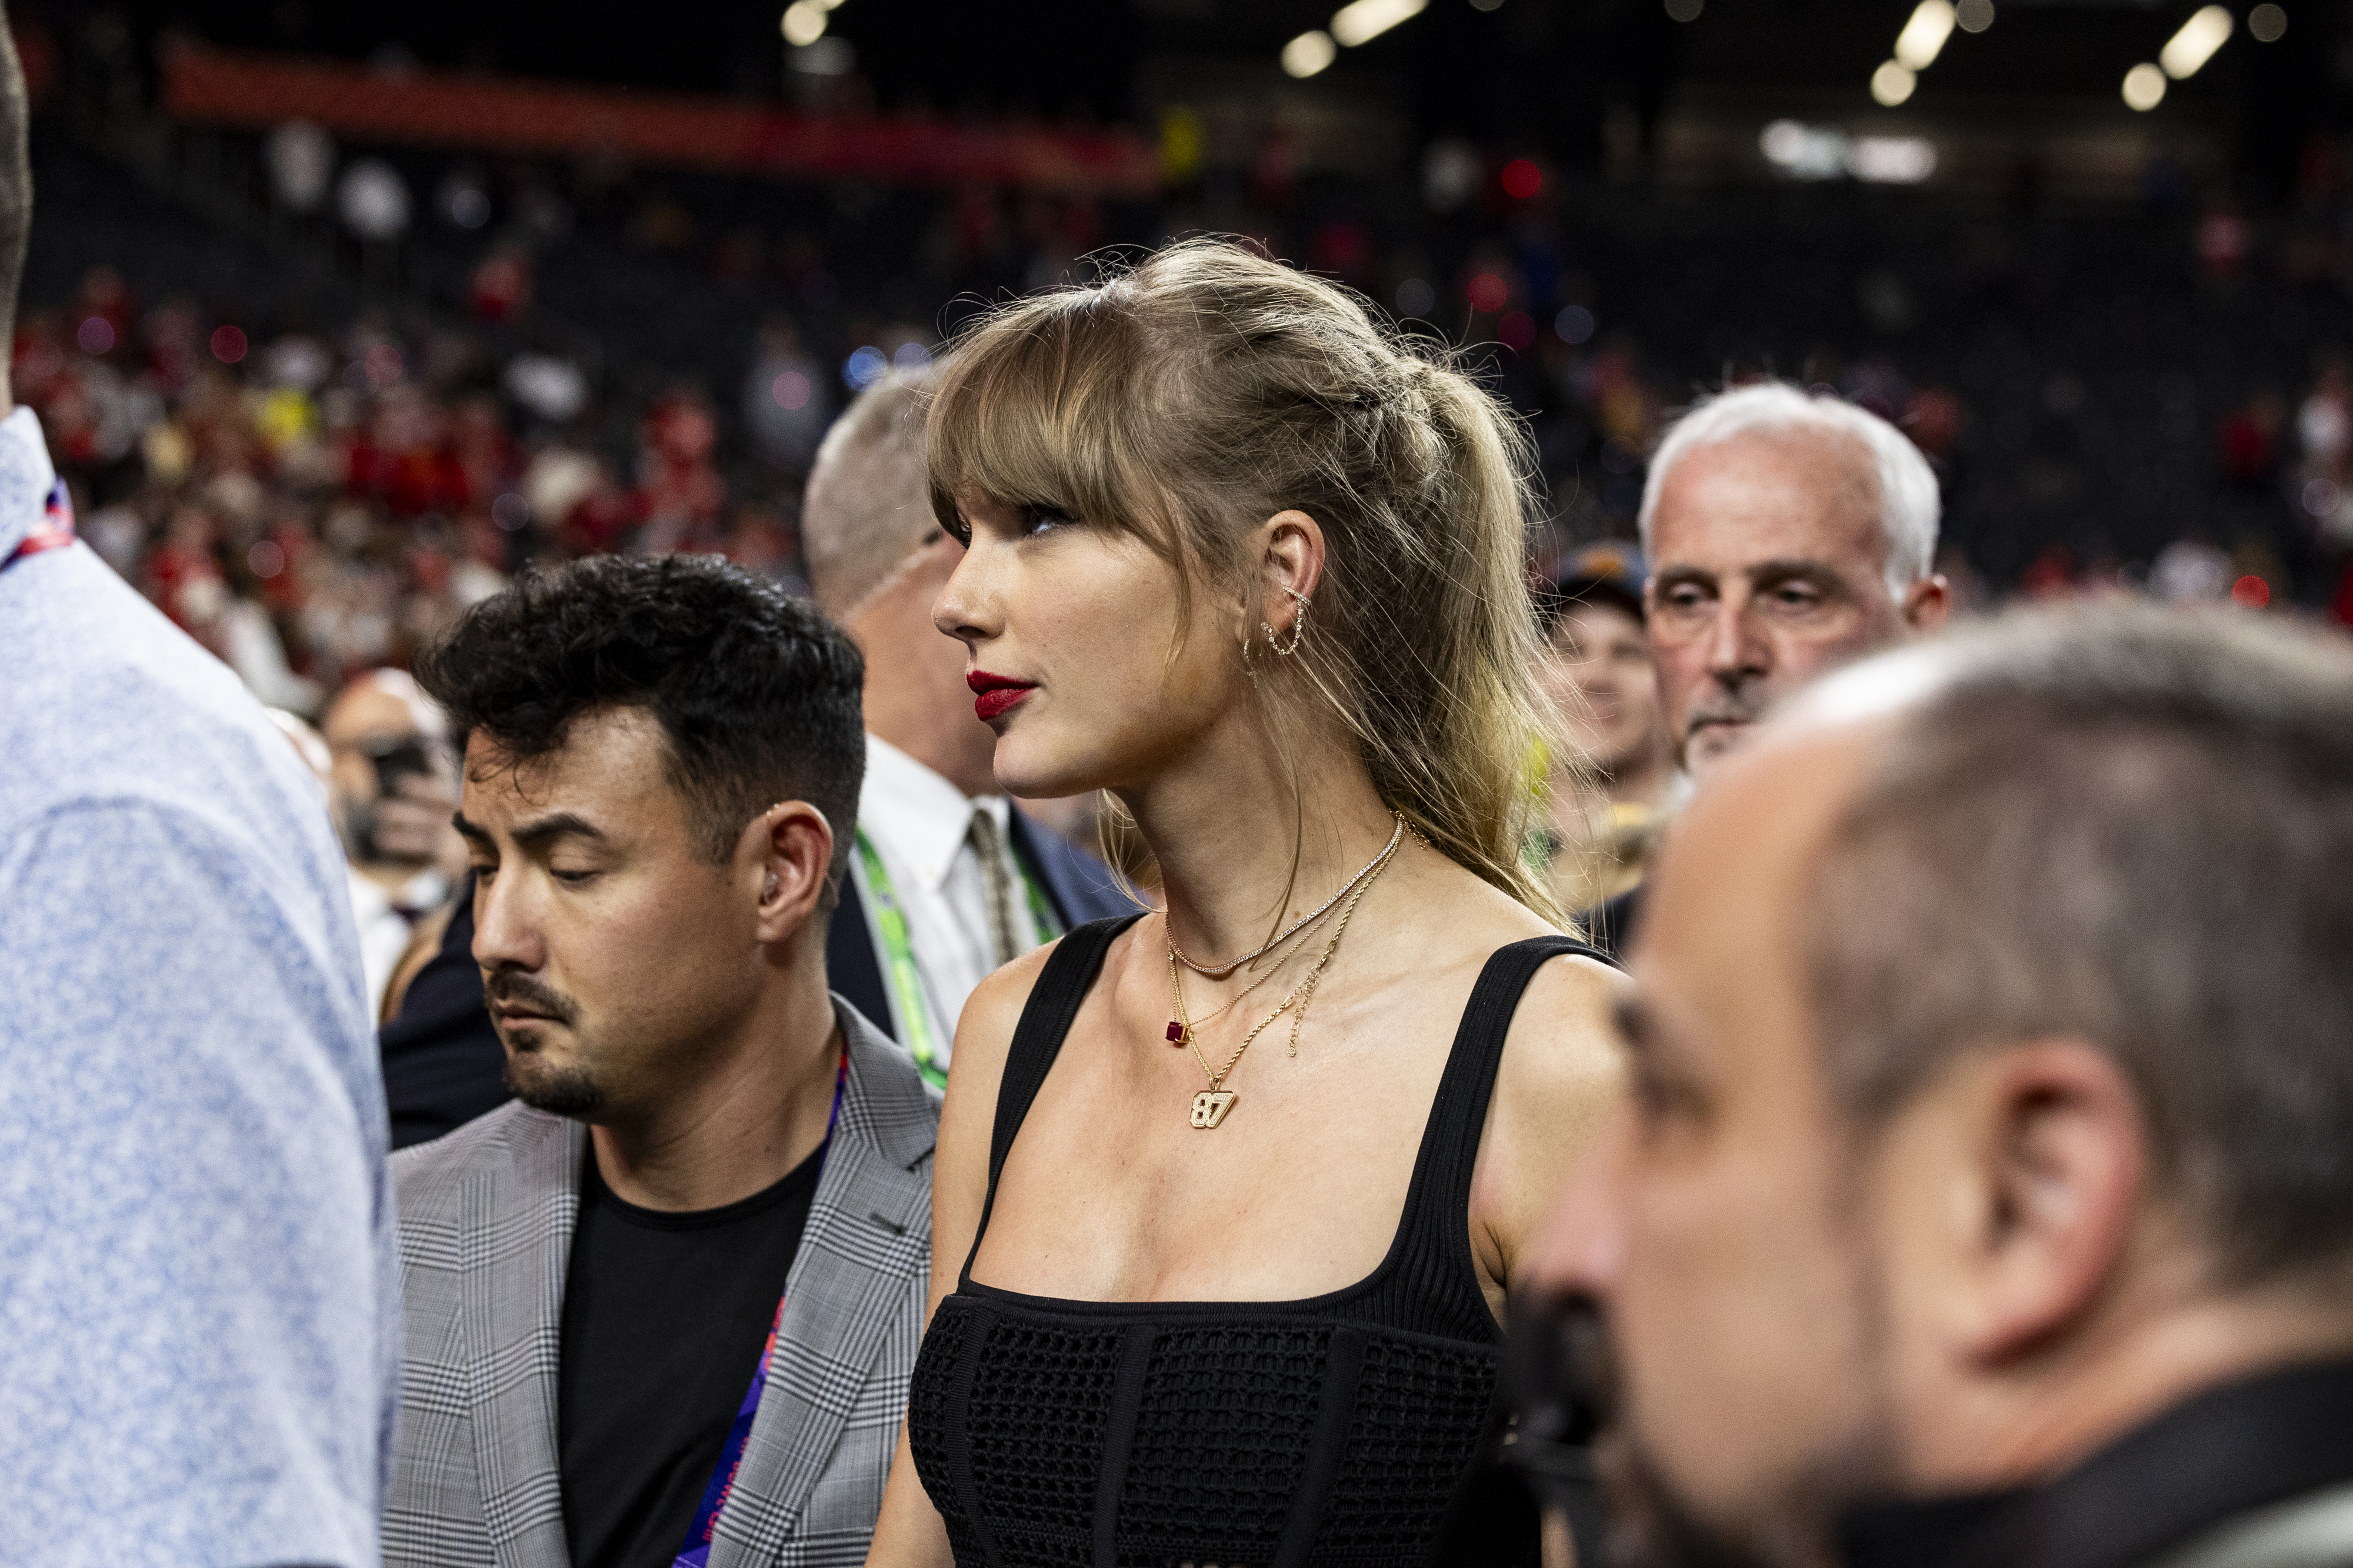 Taylor in a black outfit in a crowd, turning her head to the side